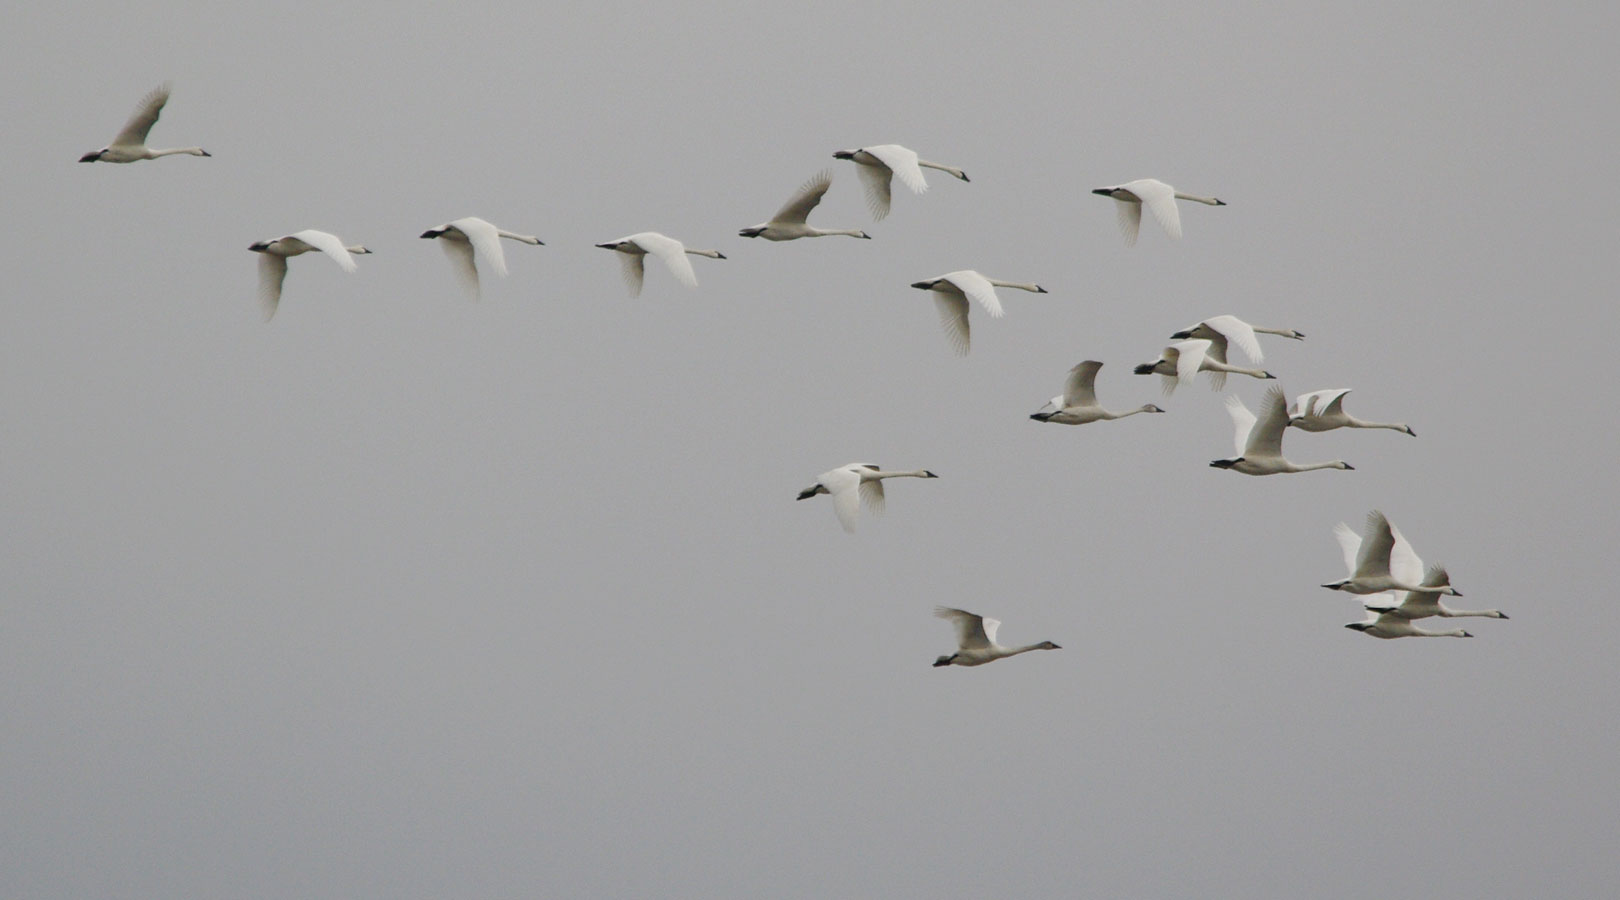 Bevy of tundra swans